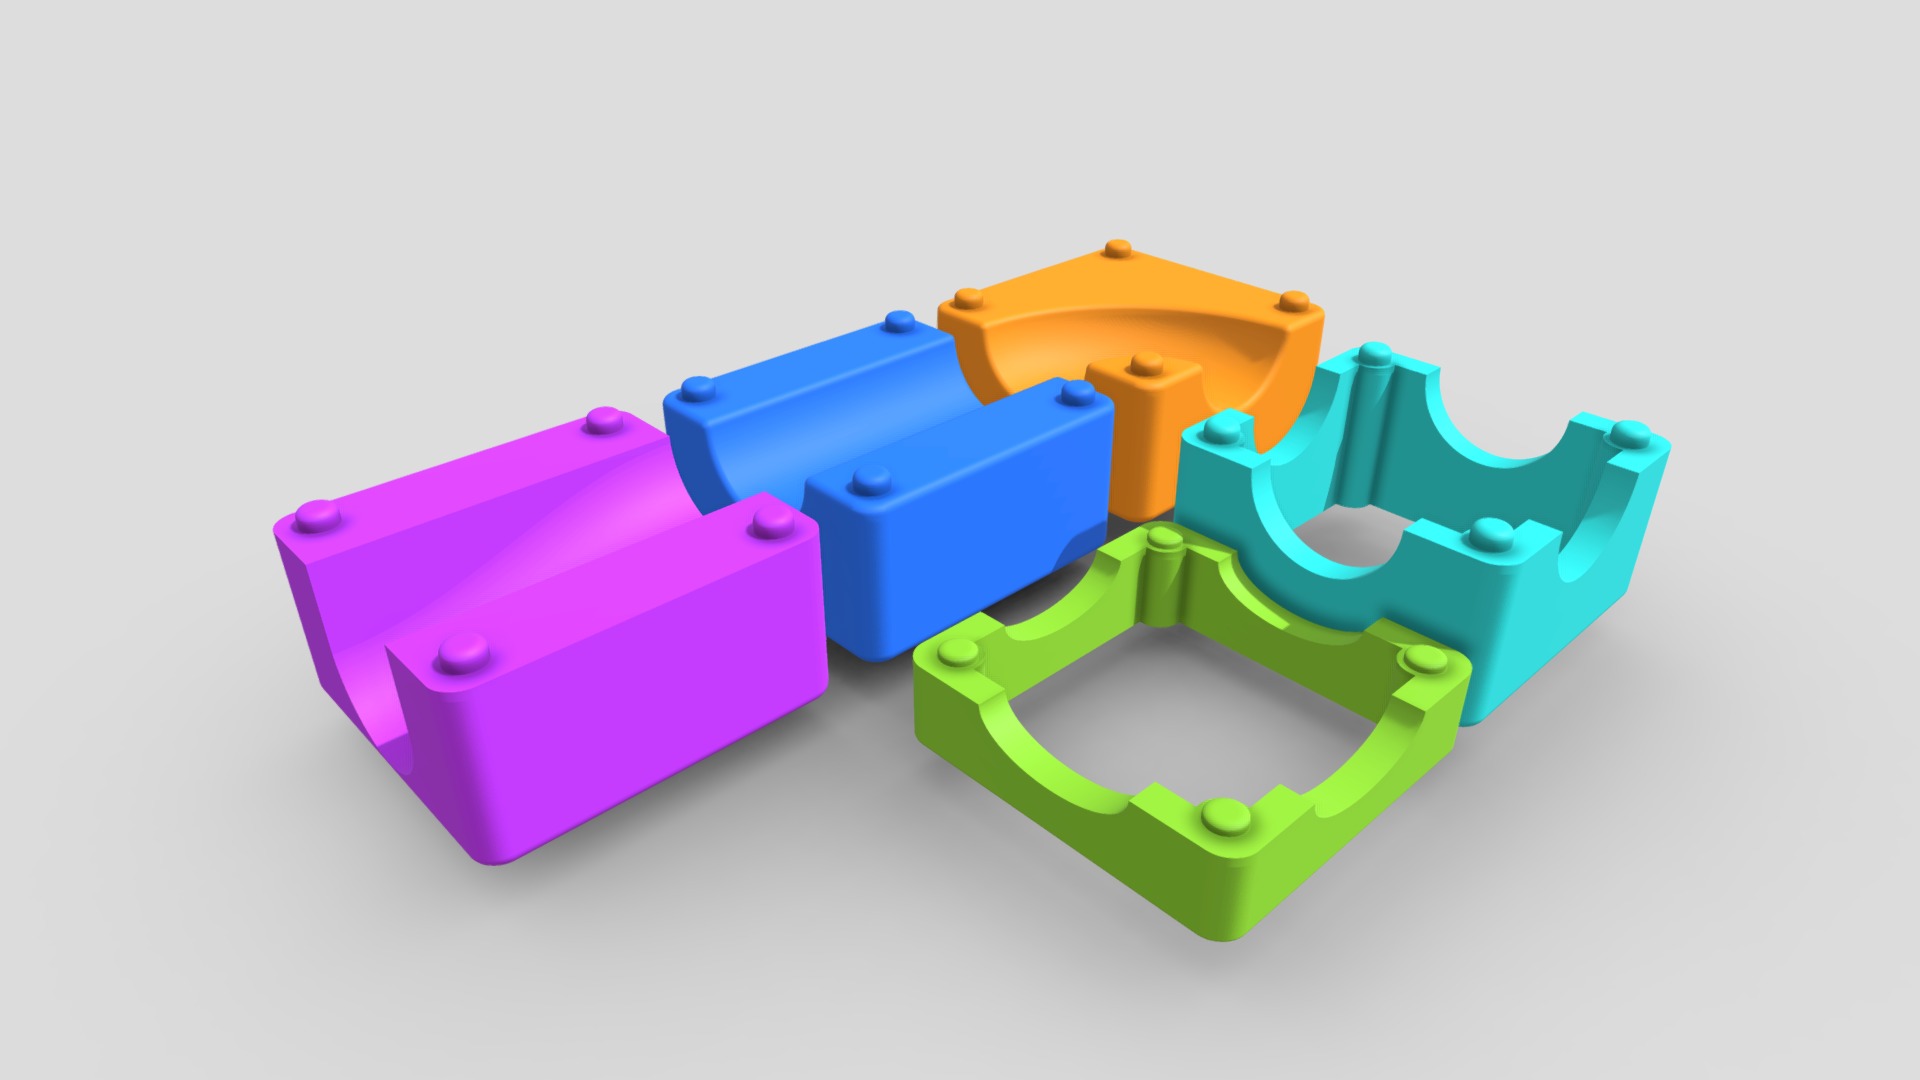 3D model Blokes - This is a 3D model of the Blokes. The 3D model is about a group of colorful blocks.